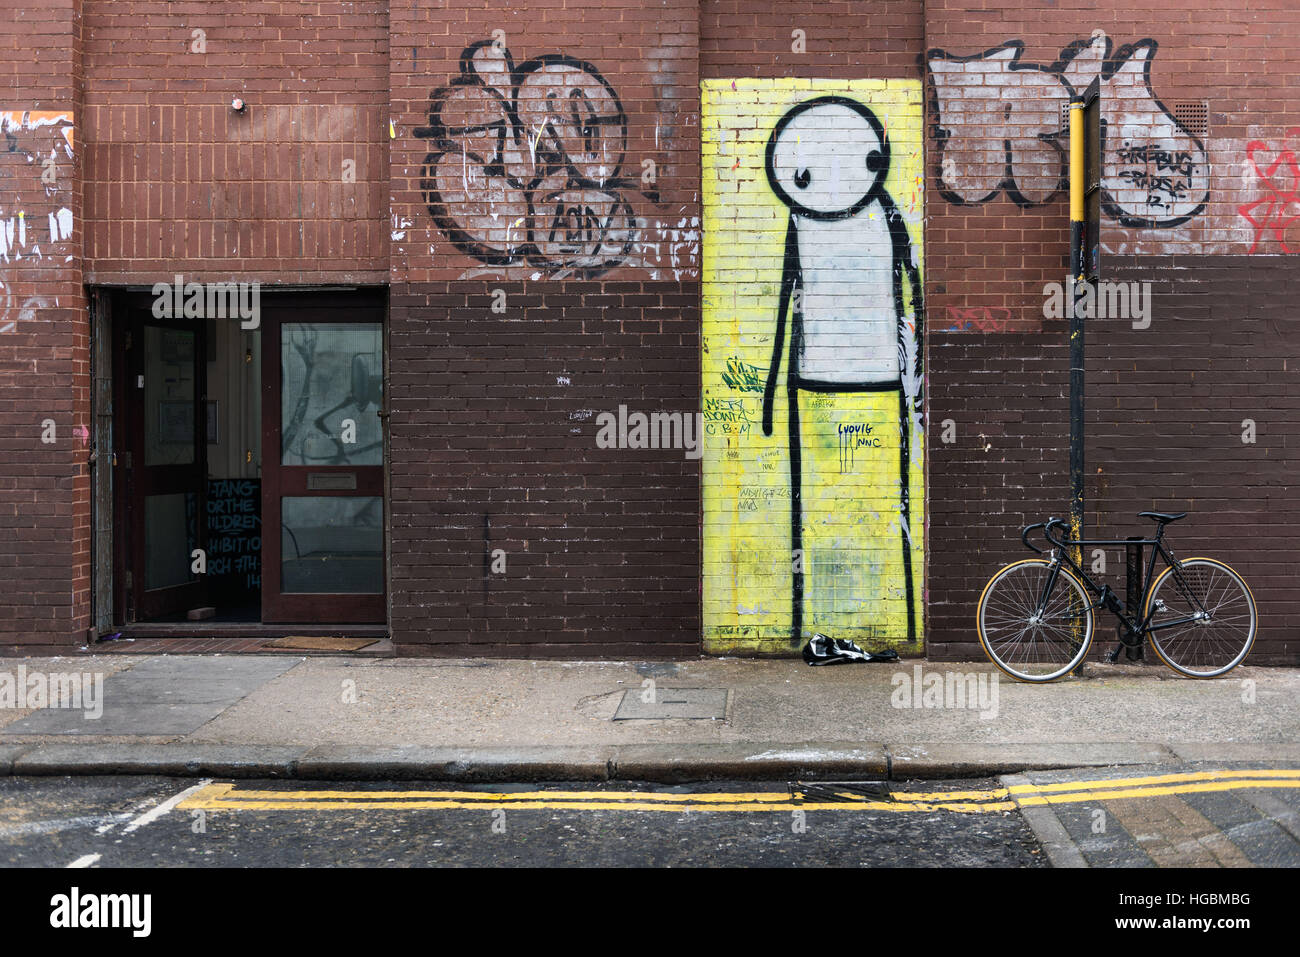 Street mural by artist Stik or a tall figure looking pensive in London Stock Photo